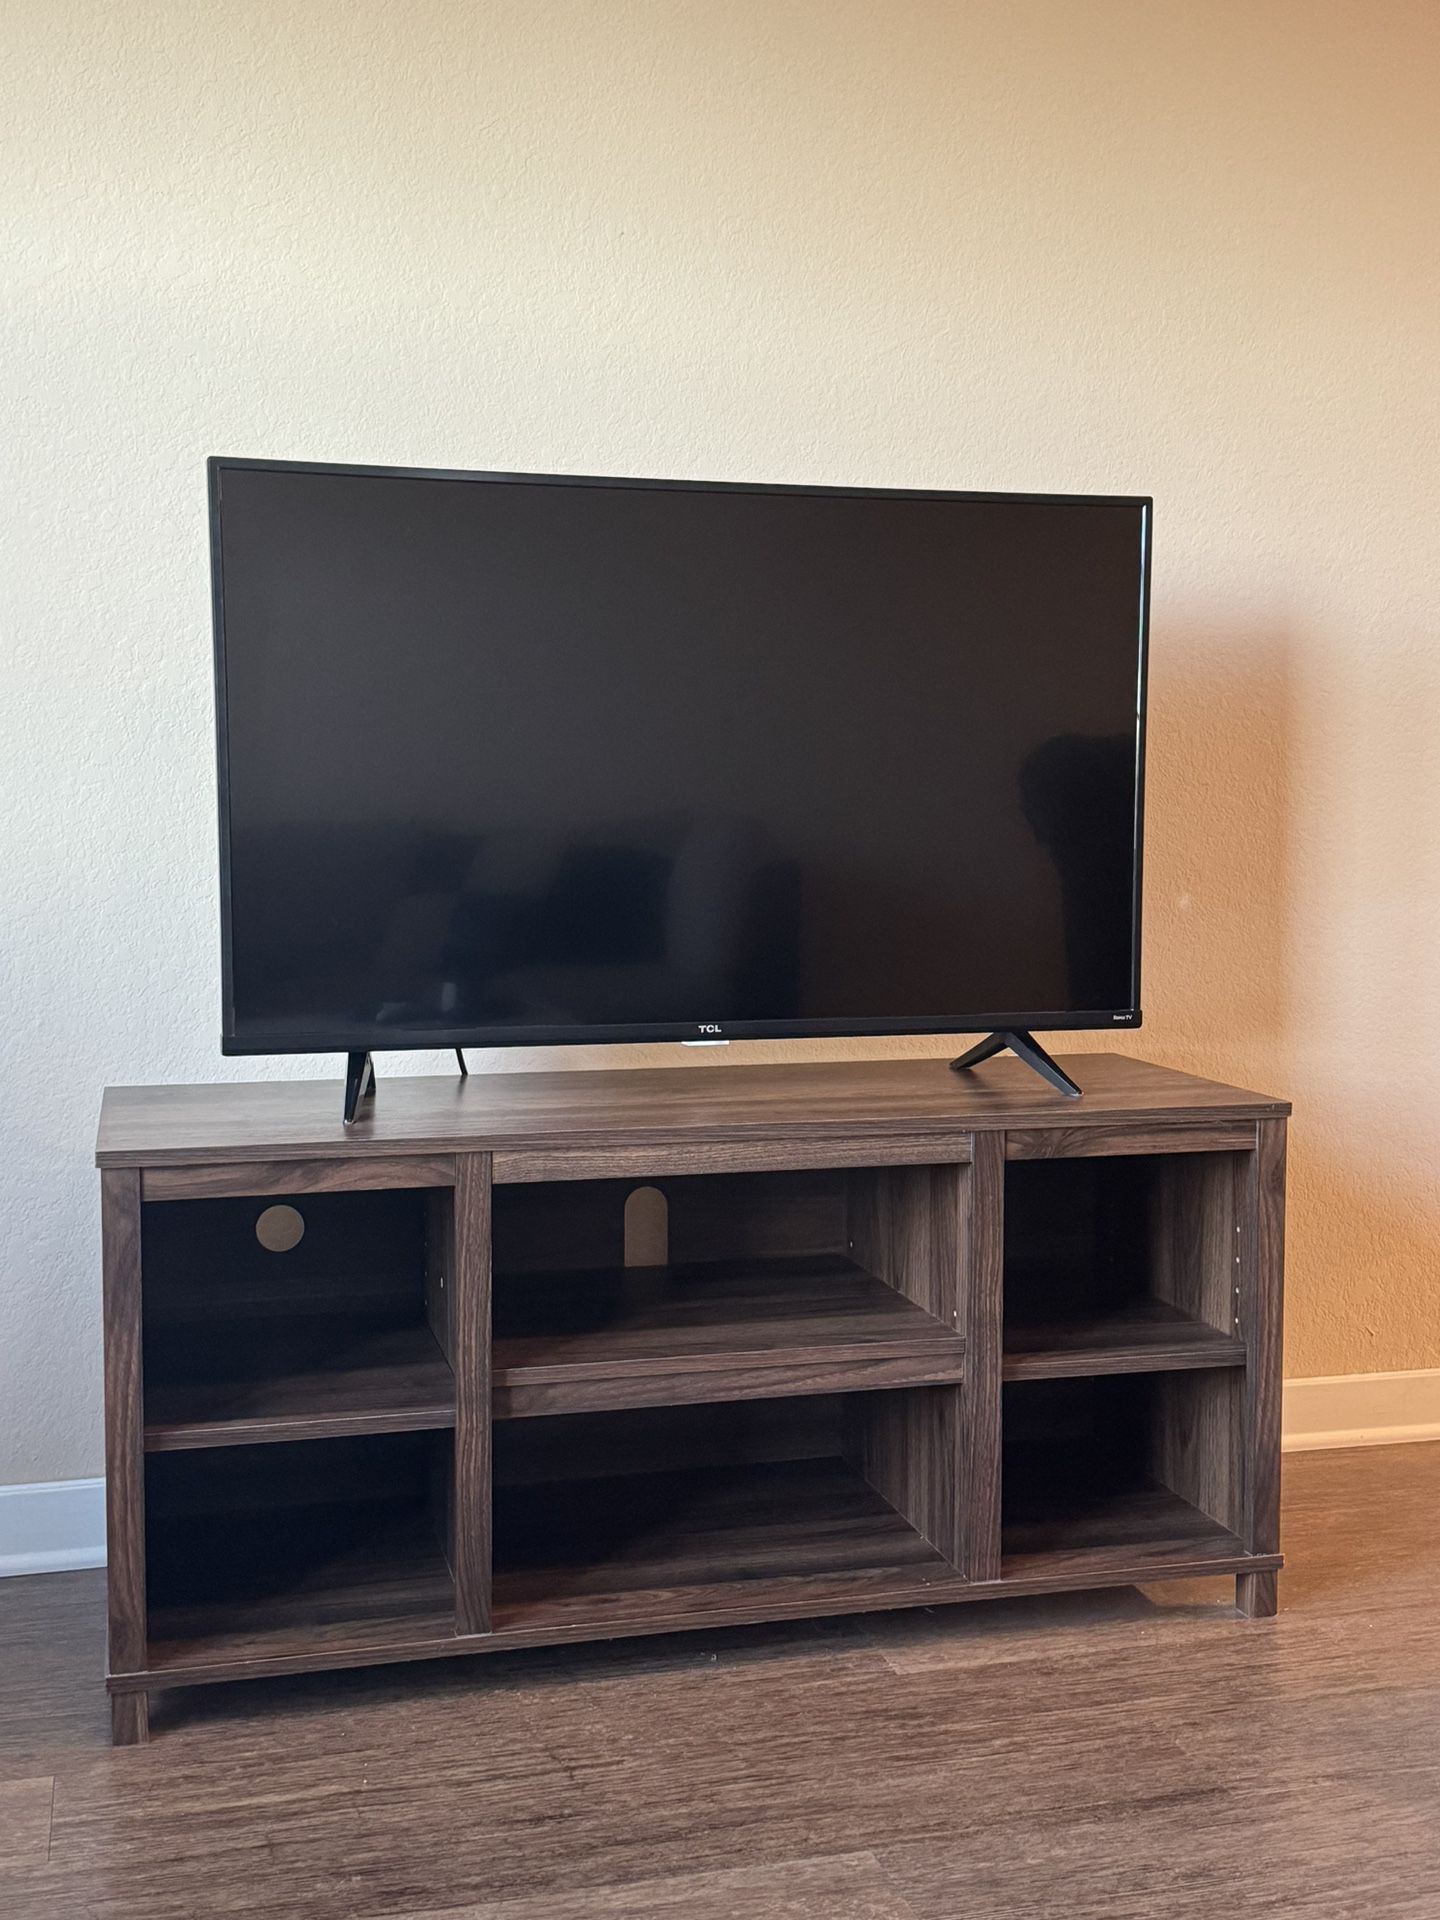 TV w/ Stand 